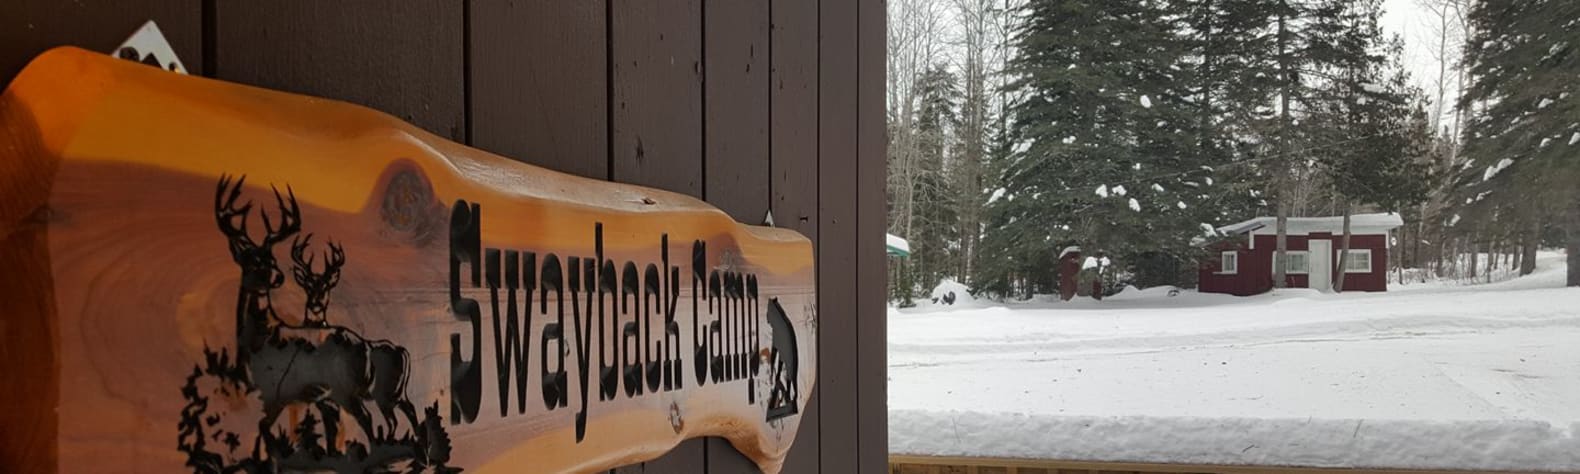 Swayback Camps & Outfitters